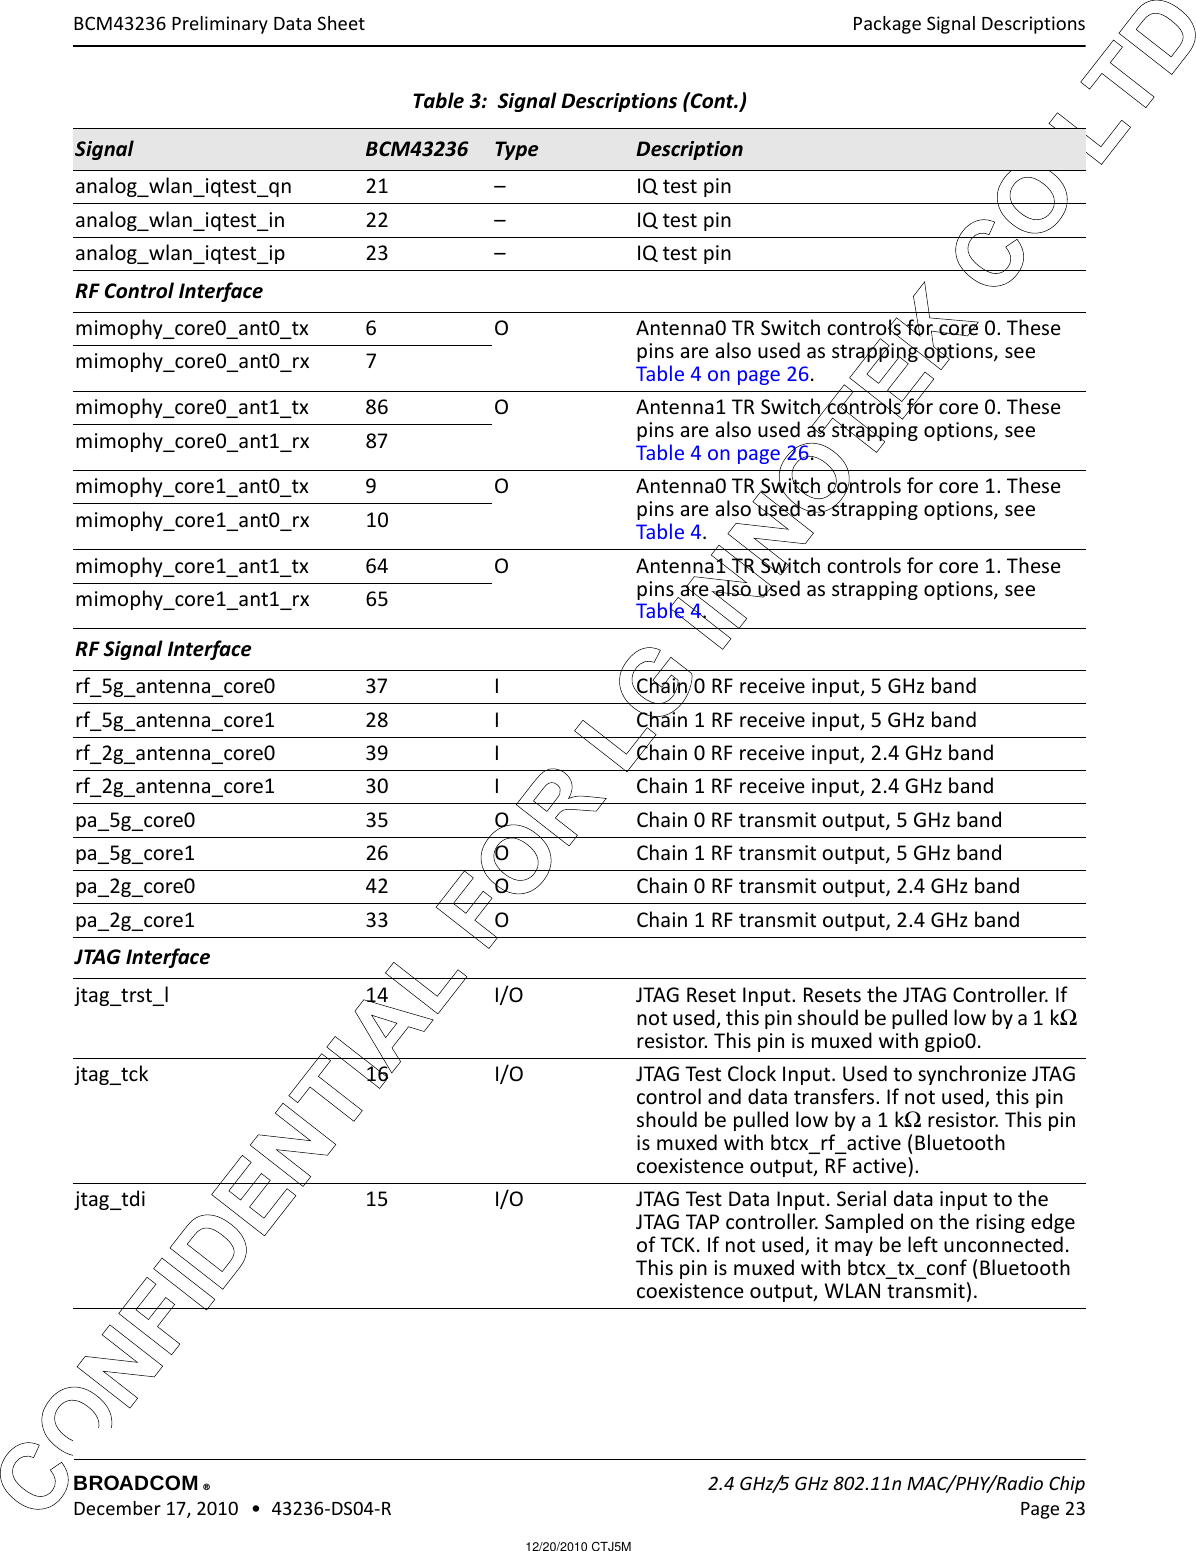 12/20/2010 CTJ5MCONFIDENTIAL FOR LG INNOTEK CO LTD Package Signal DescriptionsBROADCOM    2.4 GHz/5 GHz 802.11n MAC/PHY/Radio Chip December 17, 2010   •  43236-DS04-R Page 23®BCM43236 Preliminary Data Sheetanalog_wlan_iqtest_qn 21 – IQ test pinanalog_wlan_iqtest_in 22 – IQ test pinanalog_wlan_iqtest_ip 23 – IQ test pinRF Control Interfacemimophy_core0_ant0_tx 6 O Antenna0 TR Switch controls for core 0. These pins are also used as strapping options, see Table 4 on page 26.mimophy_core0_ant0_rx 7mimophy_core0_ant1_tx 86 O Antenna1 TR Switch controls for core 0. These pins are also used as strapping options, see Table 4 on page 26.mimophy_core0_ant1_rx 87mimophy_core1_ant0_tx 9 O Antenna0 TR Switch controls for core 1. These pins are also used as strapping options, see Table 4.mimophy_core1_ant0_rx 10mimophy_core1_ant1_tx 64 O Antenna1 TR Switch controls for core 1. These pins are also used as strapping options, see Table 4.mimophy_core1_ant1_rx 65RF Signal Interfacerf_5g_antenna_core0 37 I Chain 0 RF receive input, 5 GHz bandrf_5g_antenna_core1 28 I Chain 1 RF receive input, 5 GHz bandrf_2g_antenna_core0 39 I Chain 0 RF receive input, 2.4 GHz bandrf_2g_antenna_core1 30 I Chain 1 RF receive input, 2.4 GHz bandpa_5g_core0 35 O Chain 0 RF transmit output, 5 GHz bandpa_5g_core1 26 O Chain 1 RF transmit output, 5 GHz bandpa_2g_core0 42 O Chain 0 RF transmit output, 2.4 GHz bandpa_2g_core1 33 O Chain 1 RF transmit output, 2.4 GHz bandJTAG Interfacejtag_trst_l 14 I/O JTAG Reset Input. Resets the JTAG Controller. If not used, this pin should be pulled low by a 1 kΩ resistor. This pin is muxed with gpio0.jtag_tck 16 I/O JTAG Test Clock Input. Used to synchronize JTAG control and data transfers. If not used, this pin should be pulled low by a 1 kΩ resistor. This pin is muxed with btcx_rf_active (Bluetooth coexistence output, RF active).jtag_tdi 15 I/O JTAG Test Data Input. Serial data input to the JTAG TAP controller. Sampled on the rising edge of TCK. If not used, it may be left unconnected. This pin is muxed with btcx_tx_conf (Bluetooth coexistence output, WLAN transmit).Table 3:  Signal Descriptions (Cont.)Signal BCM43236 Type Description